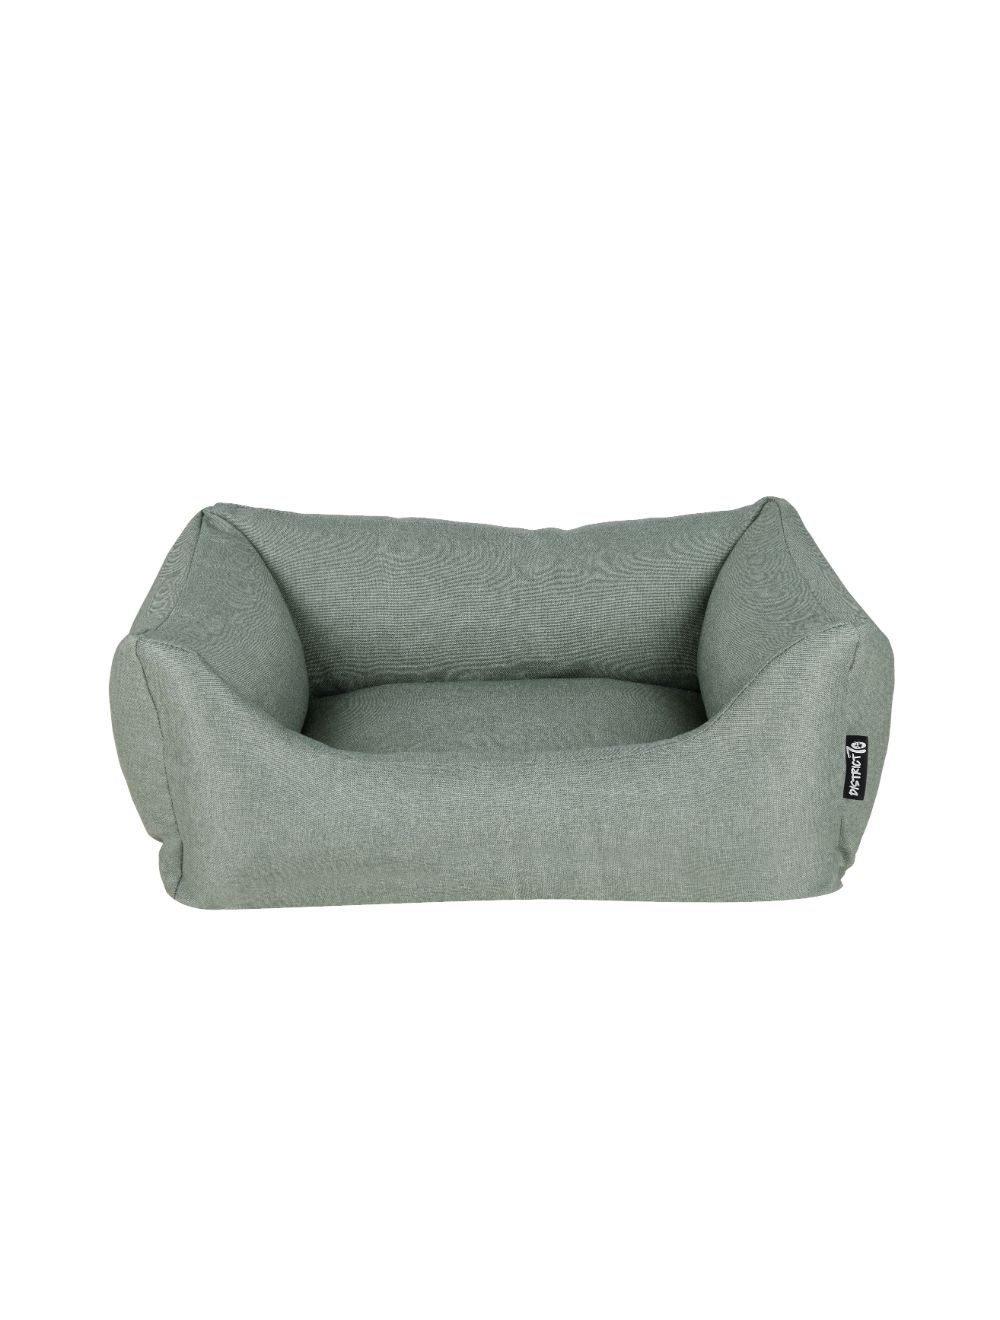 District70 - CLASSIC Box Bed, Cactus Green 100x70 - (871720261492)